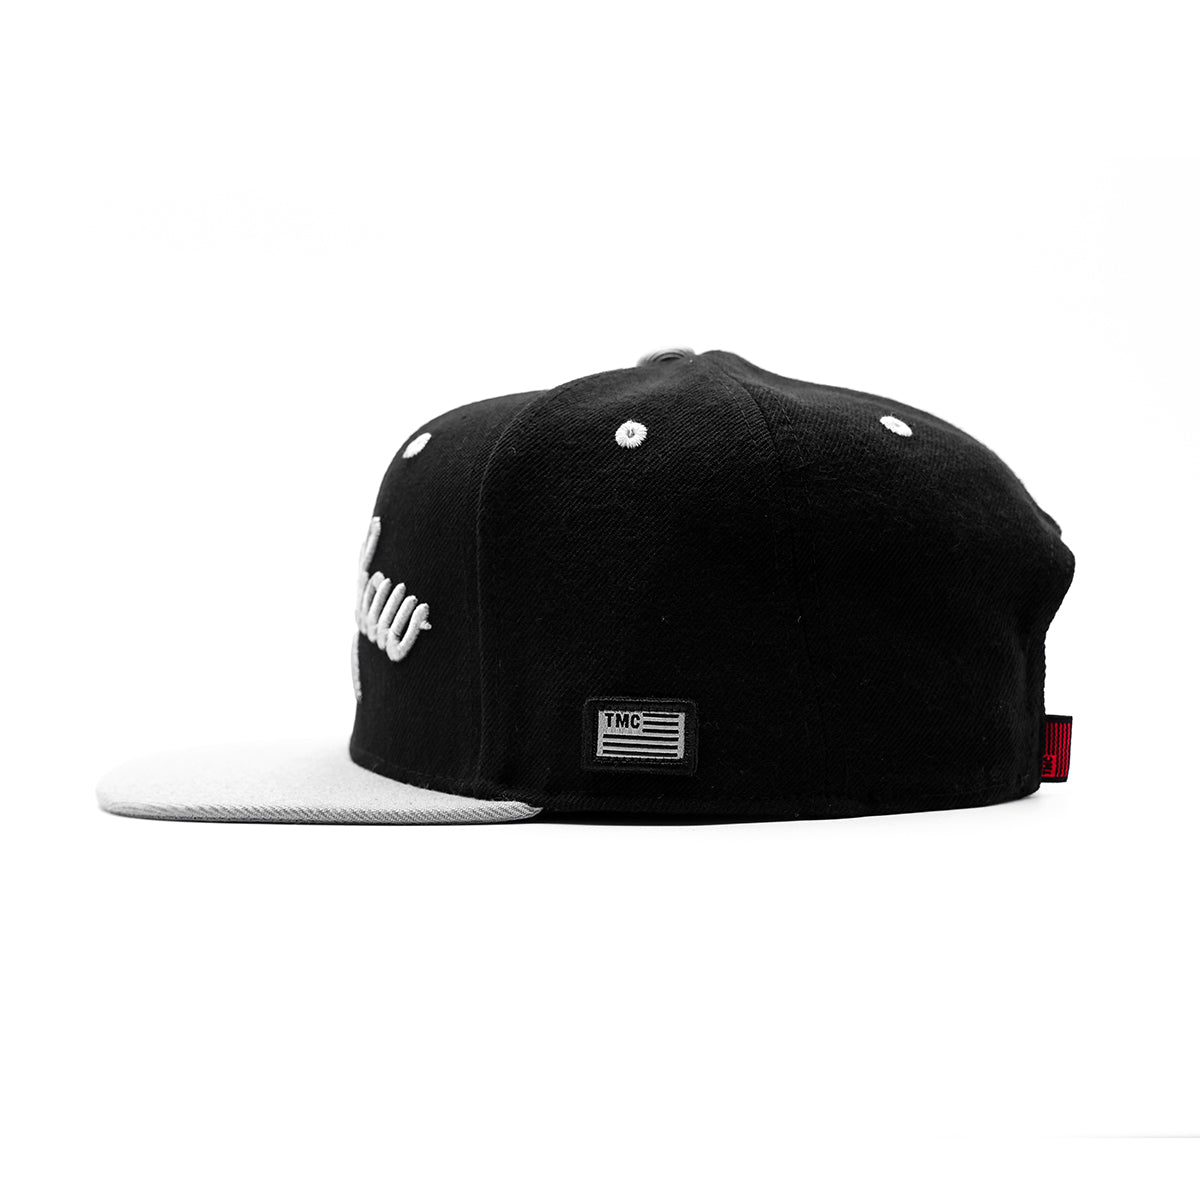 Crenshaw Limited Edition Snapback - Black/Gray [Two-Tone] - Side